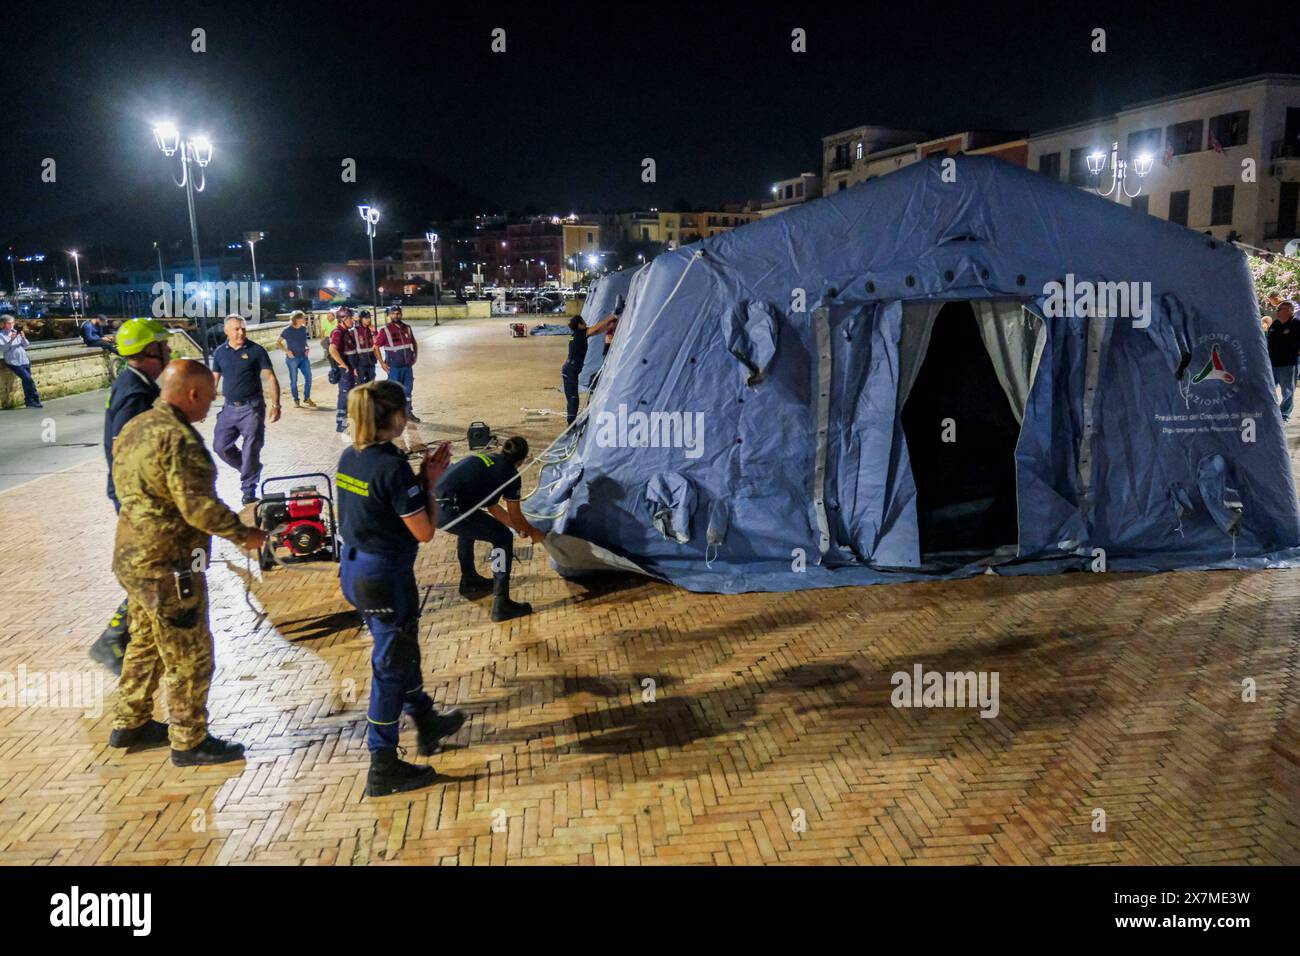 News - Italy: Campi Flegrei, bradisismo Campania s civil protection set up a tensile structure at the port of pozzuoli for people who are not confident about returning to their homes after the earthquake tremors, near Naples, southern Italy, 20 May 2024. The tremor that occurred at 8.10pm with epicentre in the Campi Flegrei was of magnitude 4.4. This was reported by the National Institute of Geophysics and Volcanology, according to which the depth of the quake was three kilometres. Napoli Pozzuoli Italy Copyright: xAntonioxBalascox/xLiveMediax LPN 1364589 Stock Photo